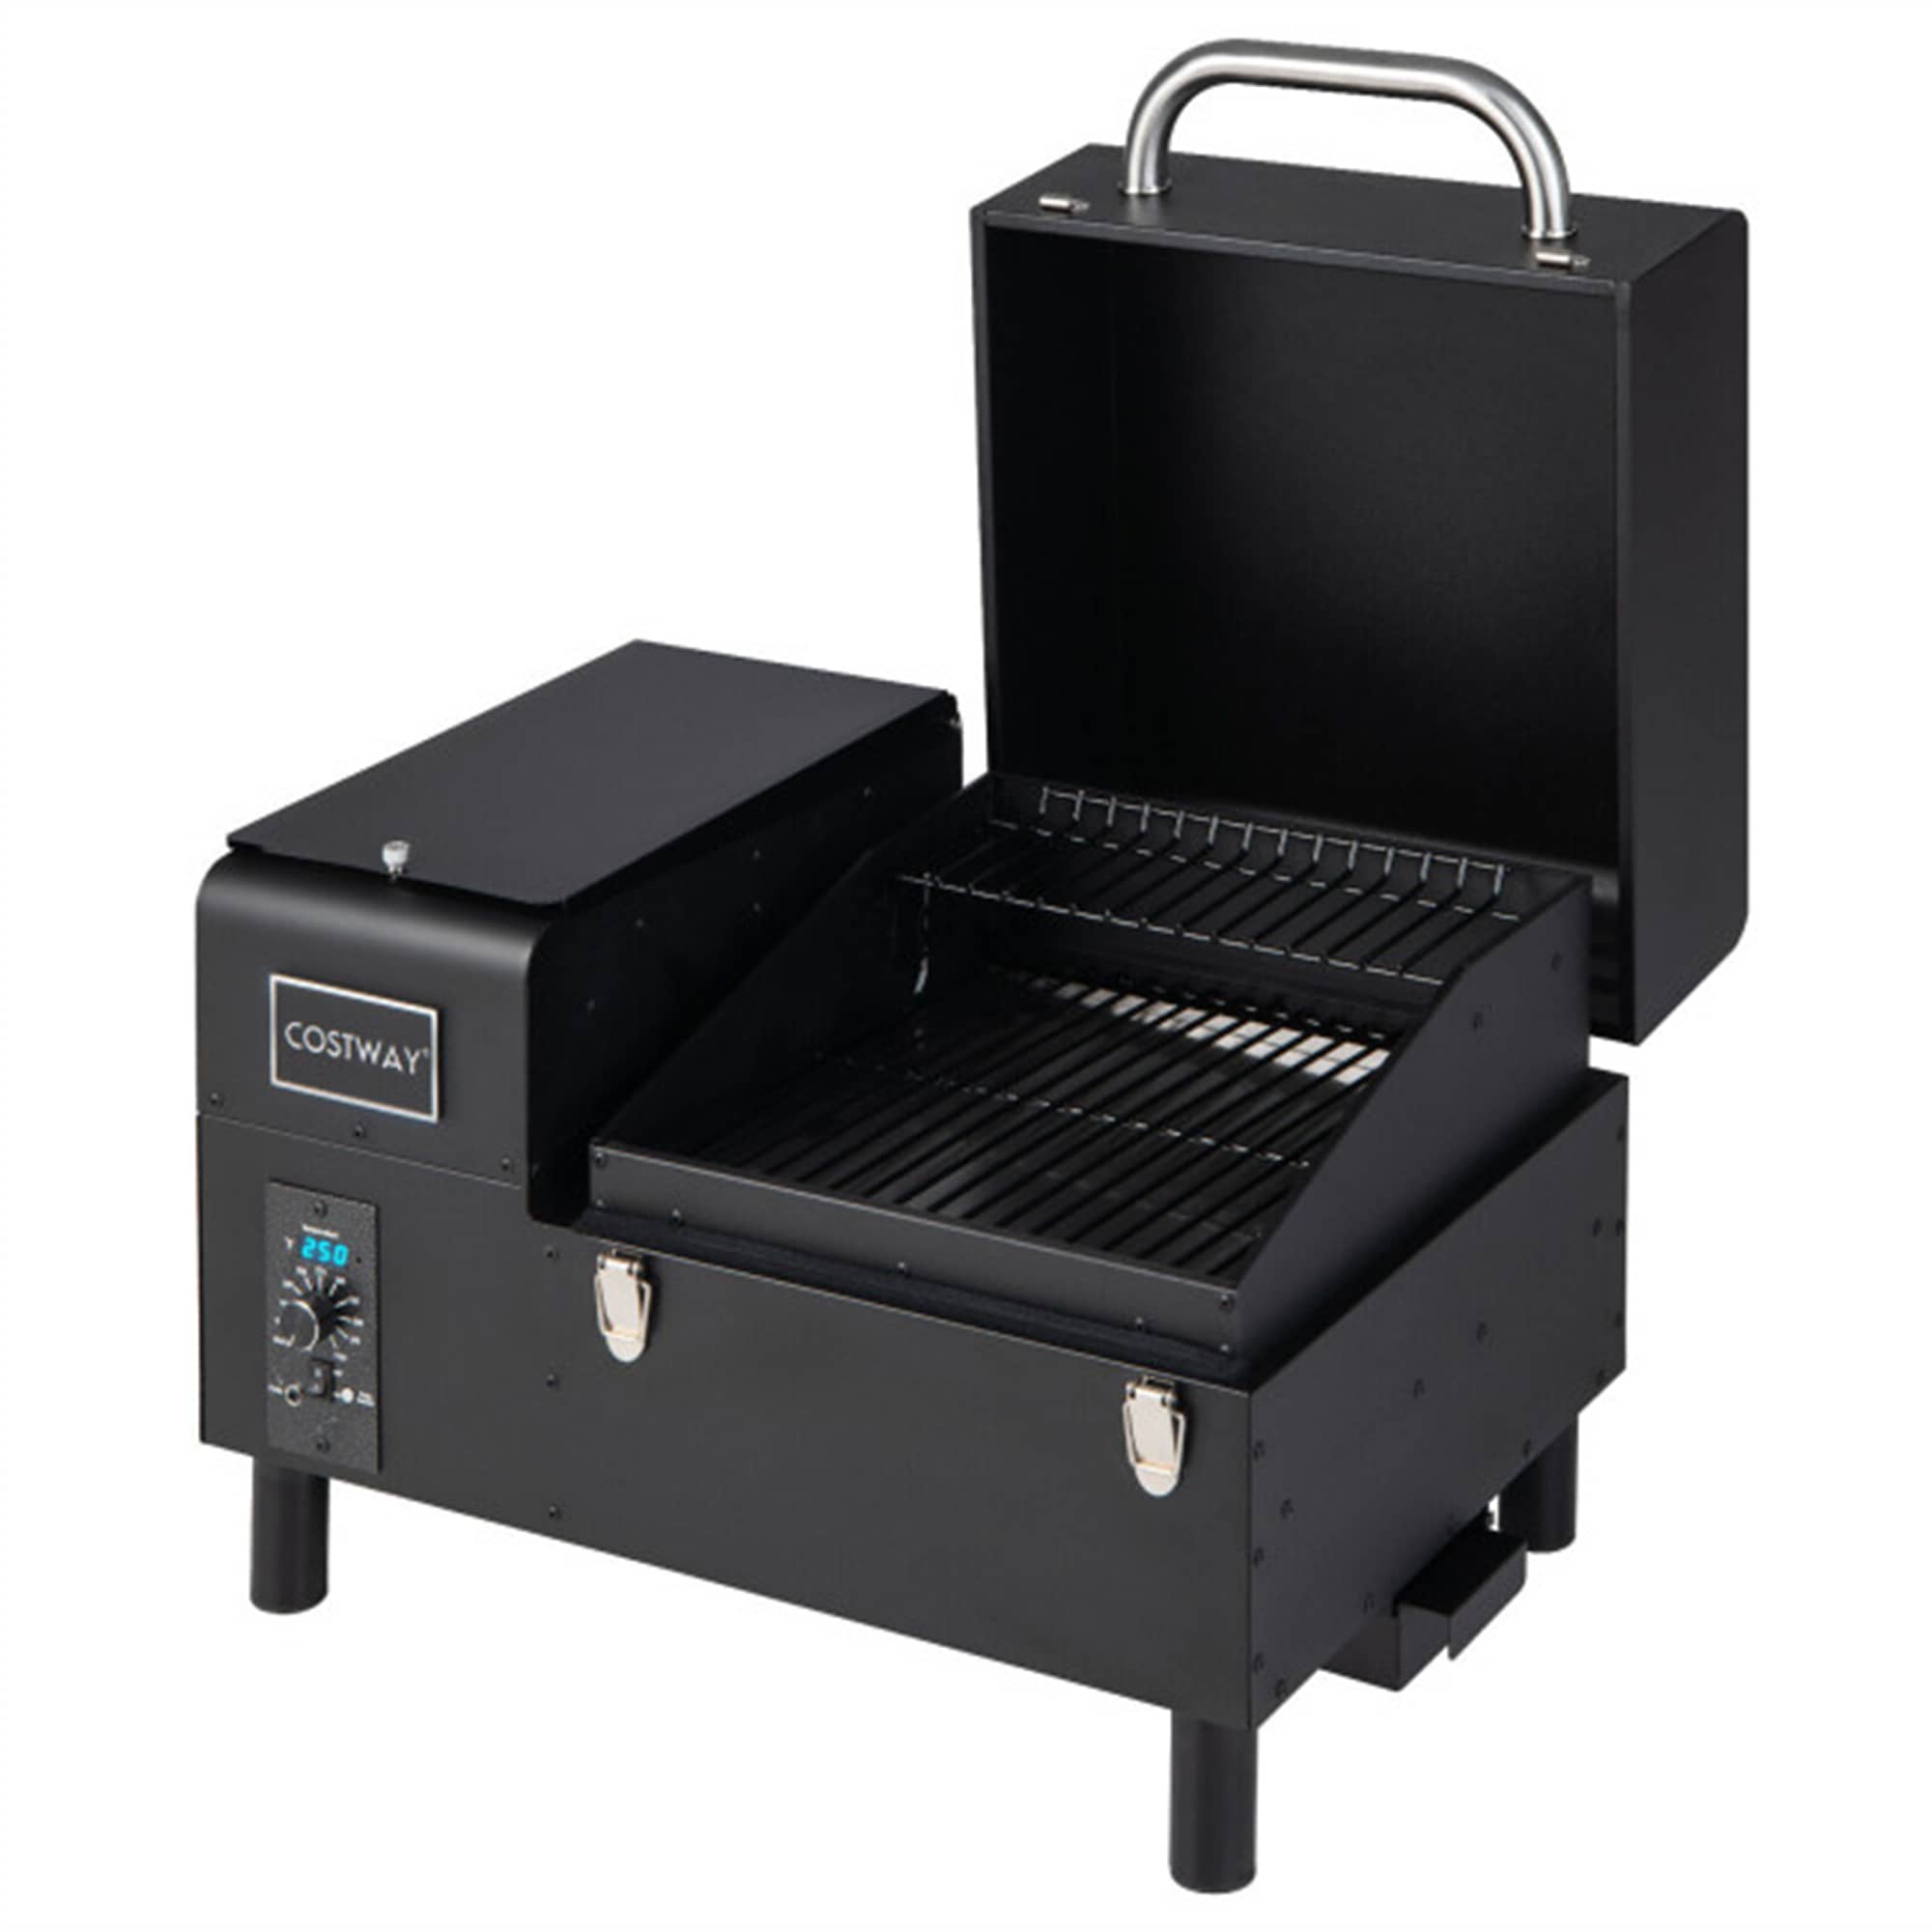 CASAINC Portable Pellet Grill and Smoker Tabletop with Temperature Probe